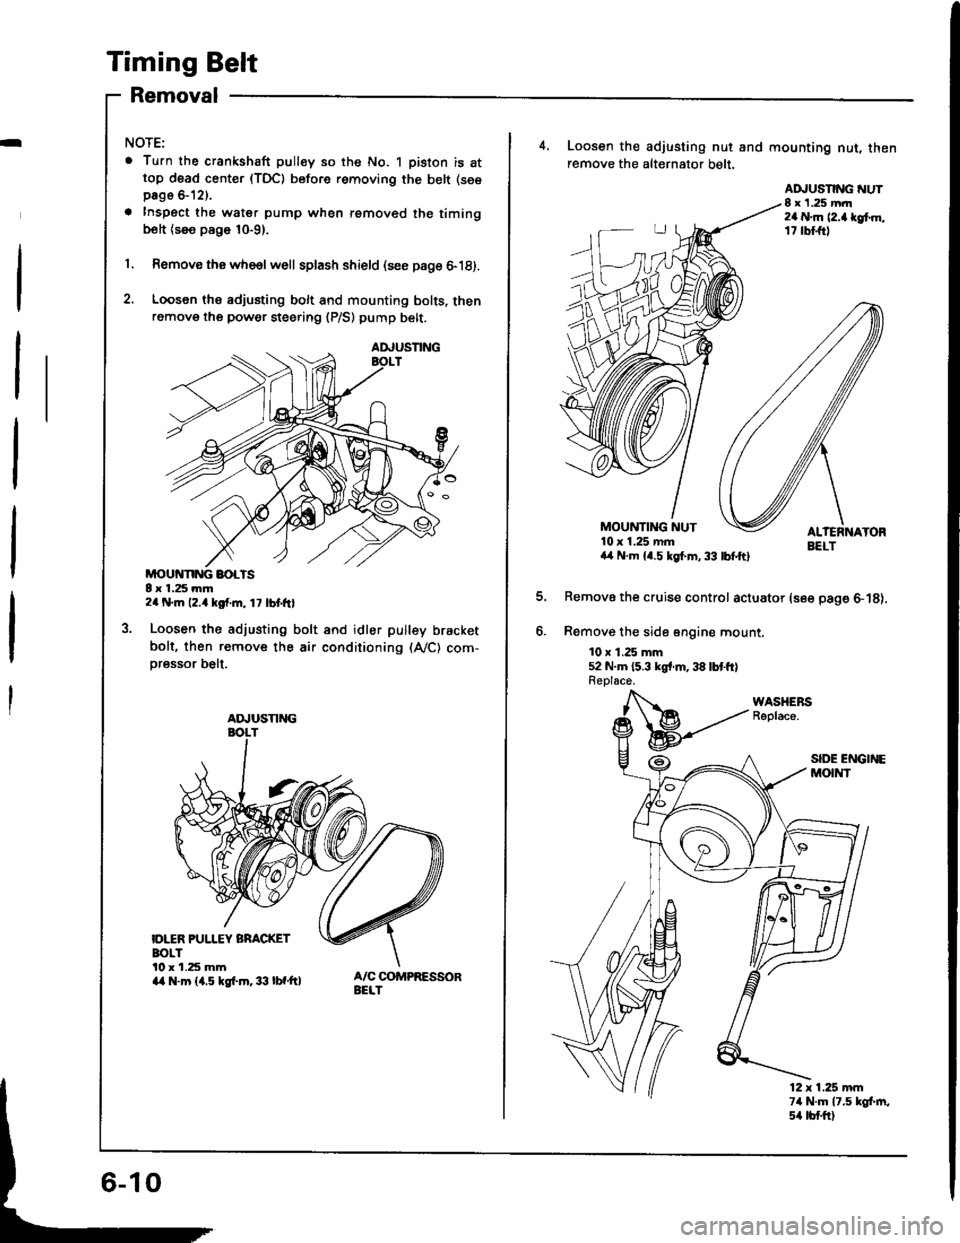 HONDA INTEGRA 1994 4.G Workshop Manual Timing Belt
Removal
I
NOTE:
. Turn the crankshaft pulley so the No. 1 piston is attop d6ad center (TDC) before removing the belt (see
page &12).
a Inspect the water pump when removed the timingbolt {s